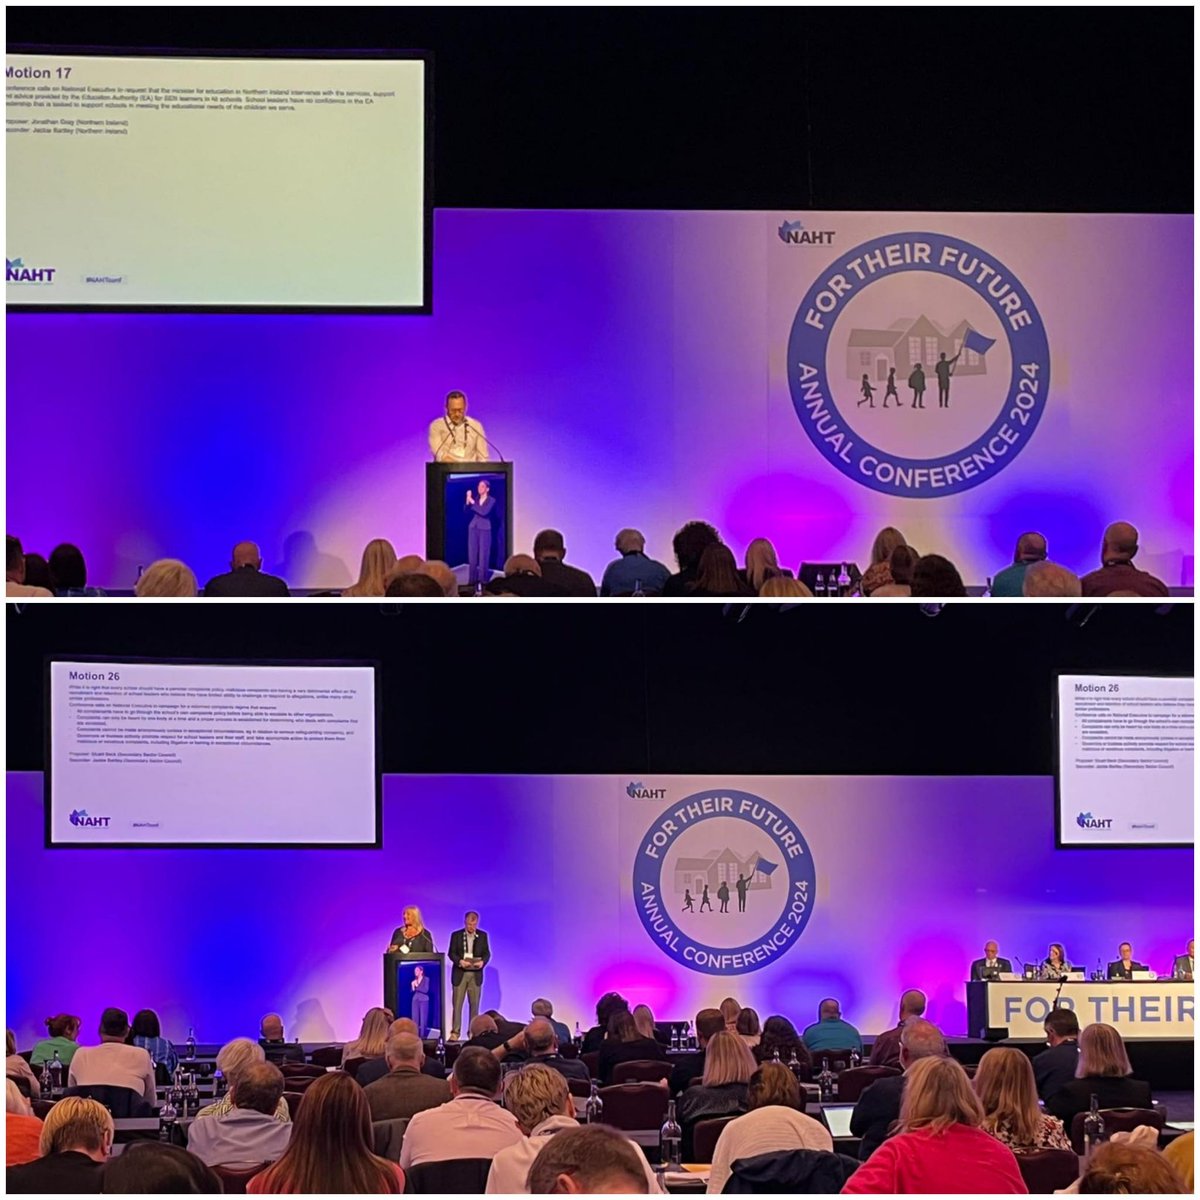 NI delegates spoke on motions relating to SEN and abuse on school staff at the NAHT national conference in Wales today #NAHTconf